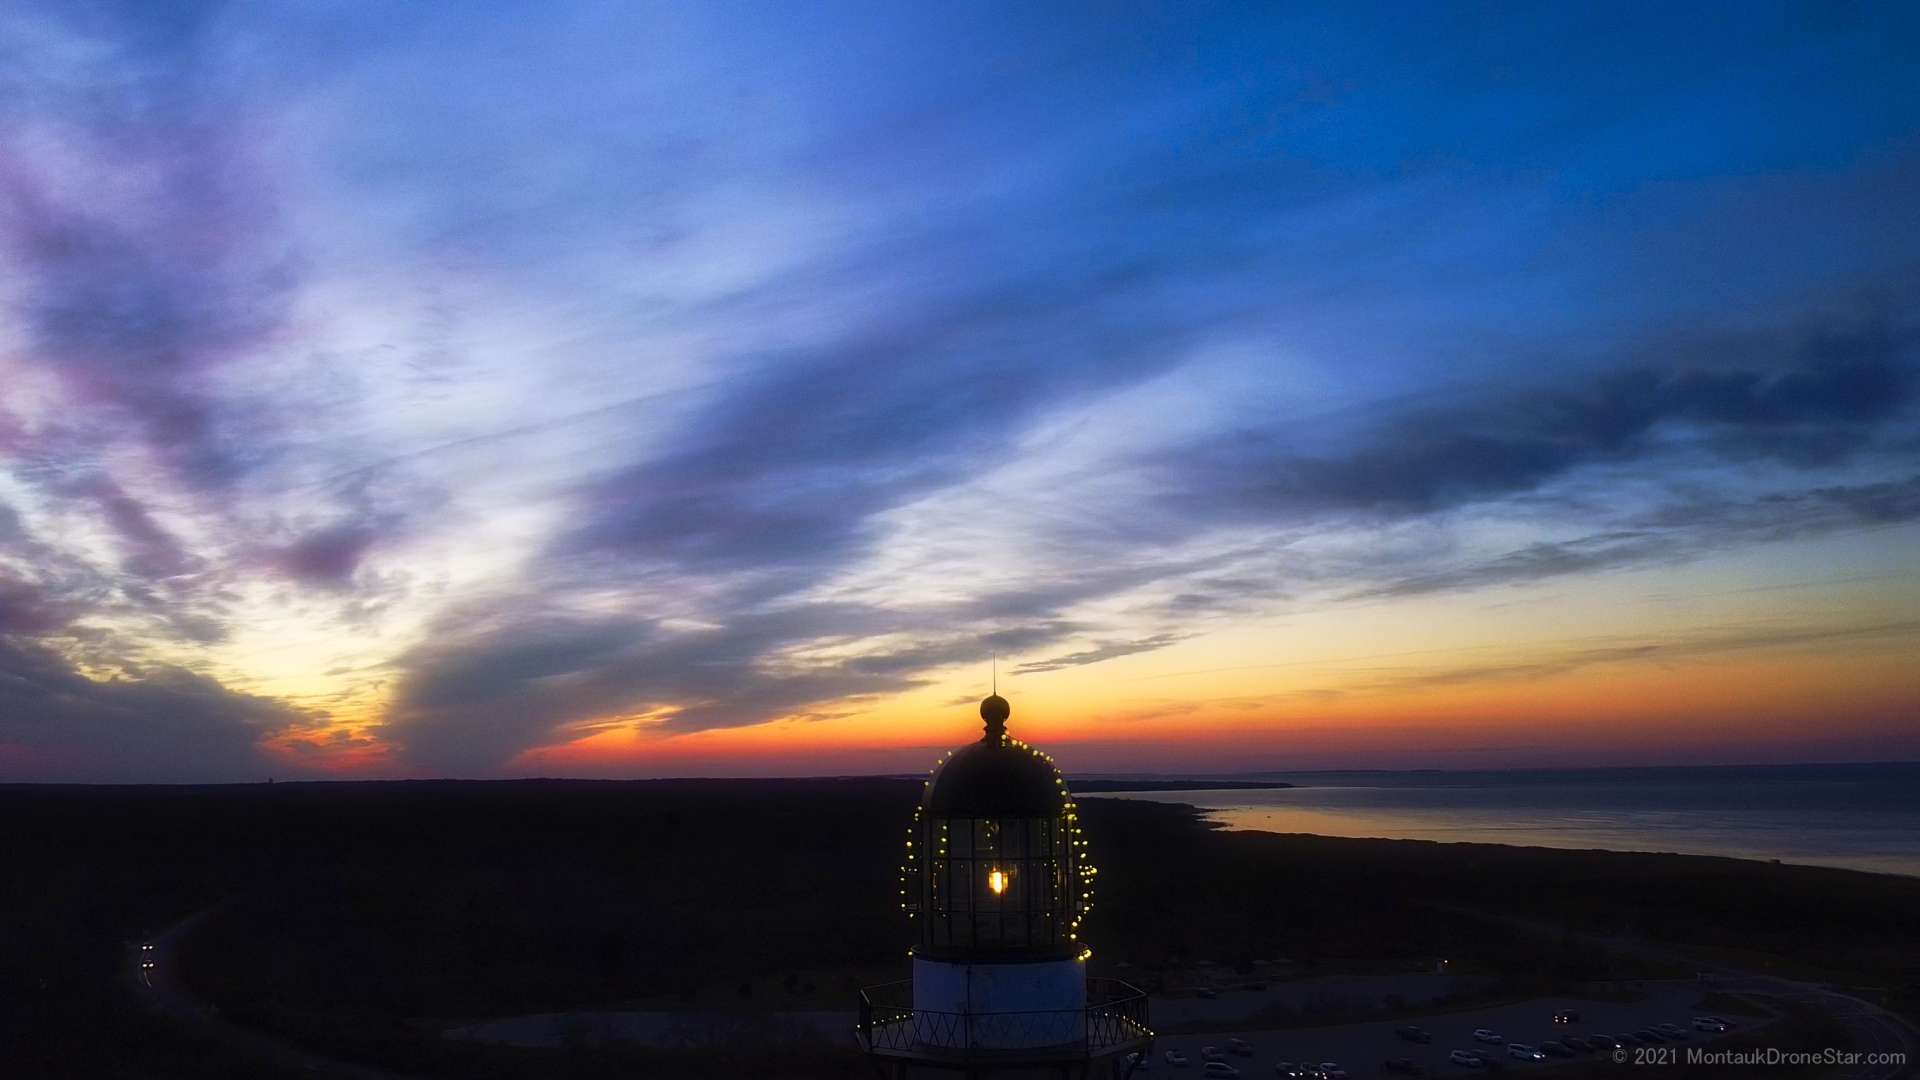 Montauk Point Lighthouse during a spectacular sunset